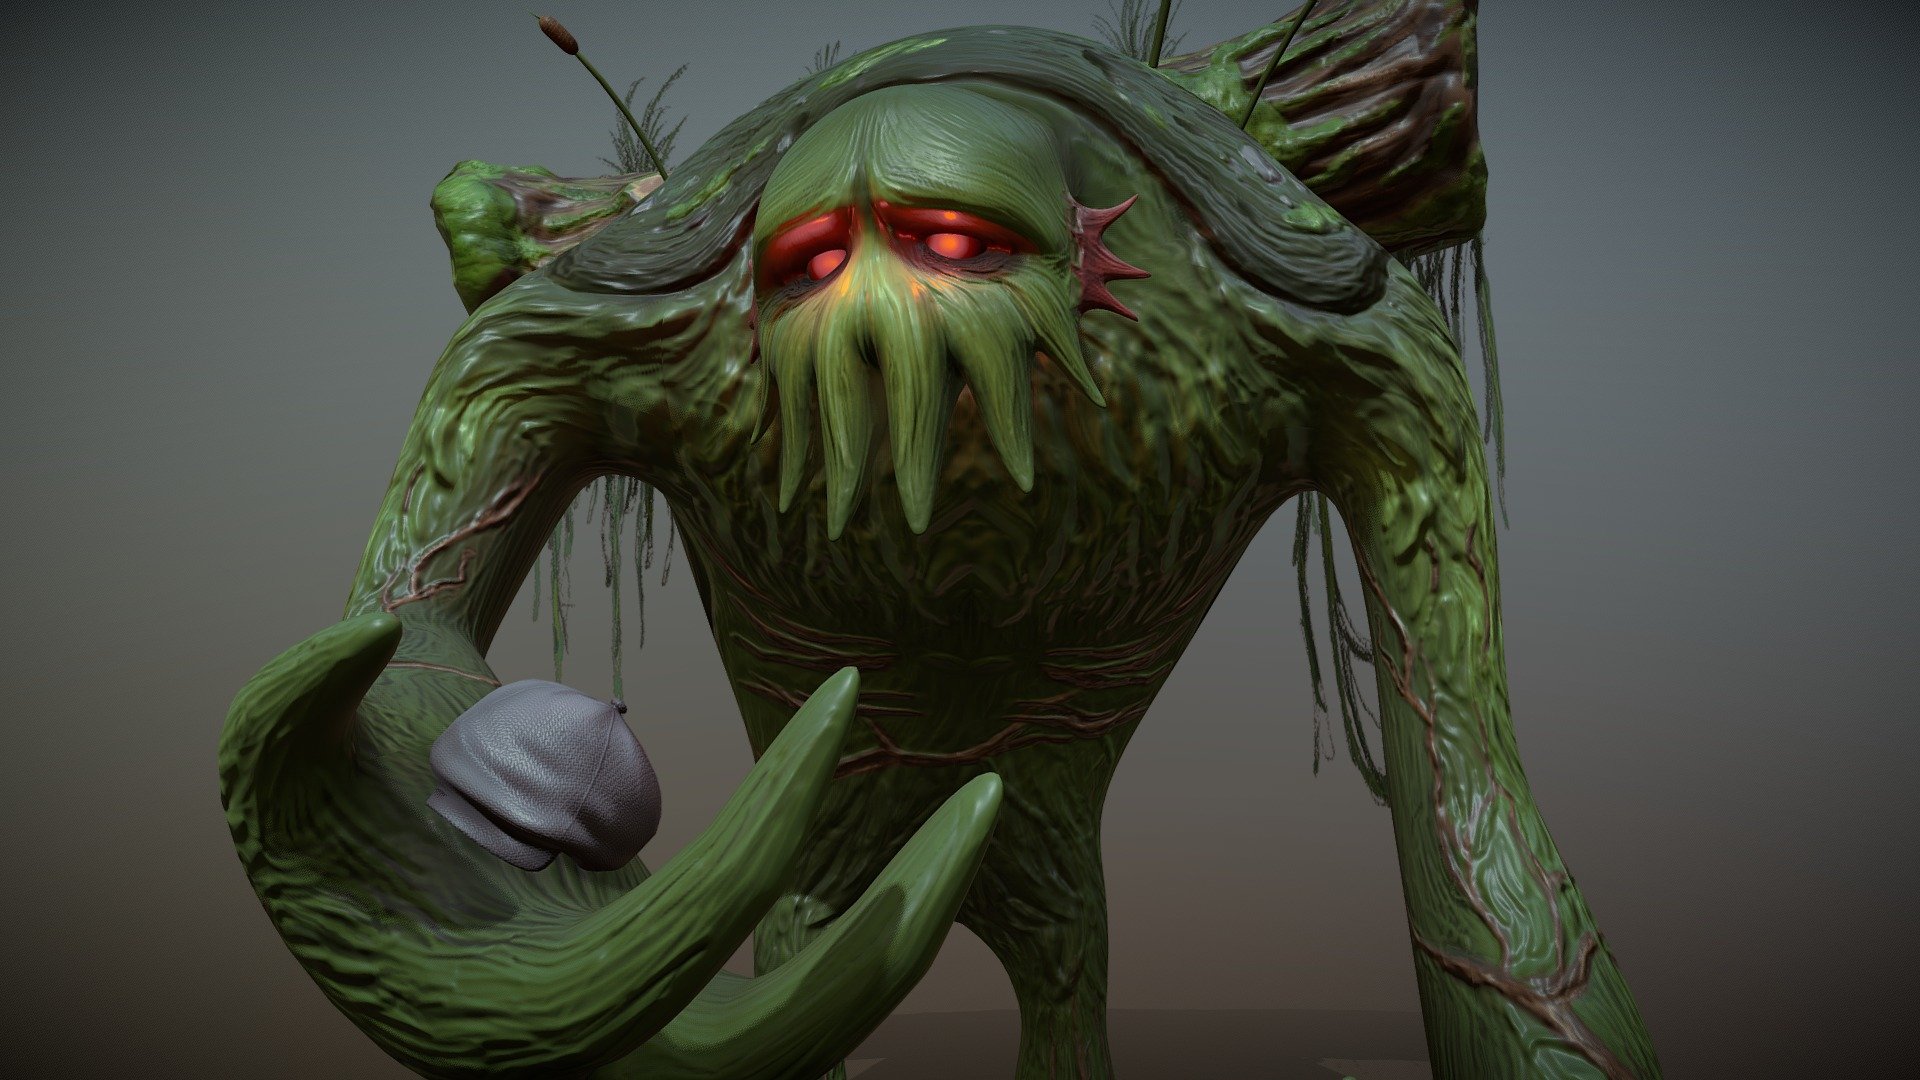 A swamp creature character that I made completely from scratch for my animation thesis, coming next year! The high poly was created in Zbrush and then baked onto the low poly made in 3DS Max. Additional textures created in Photoshop 3d model